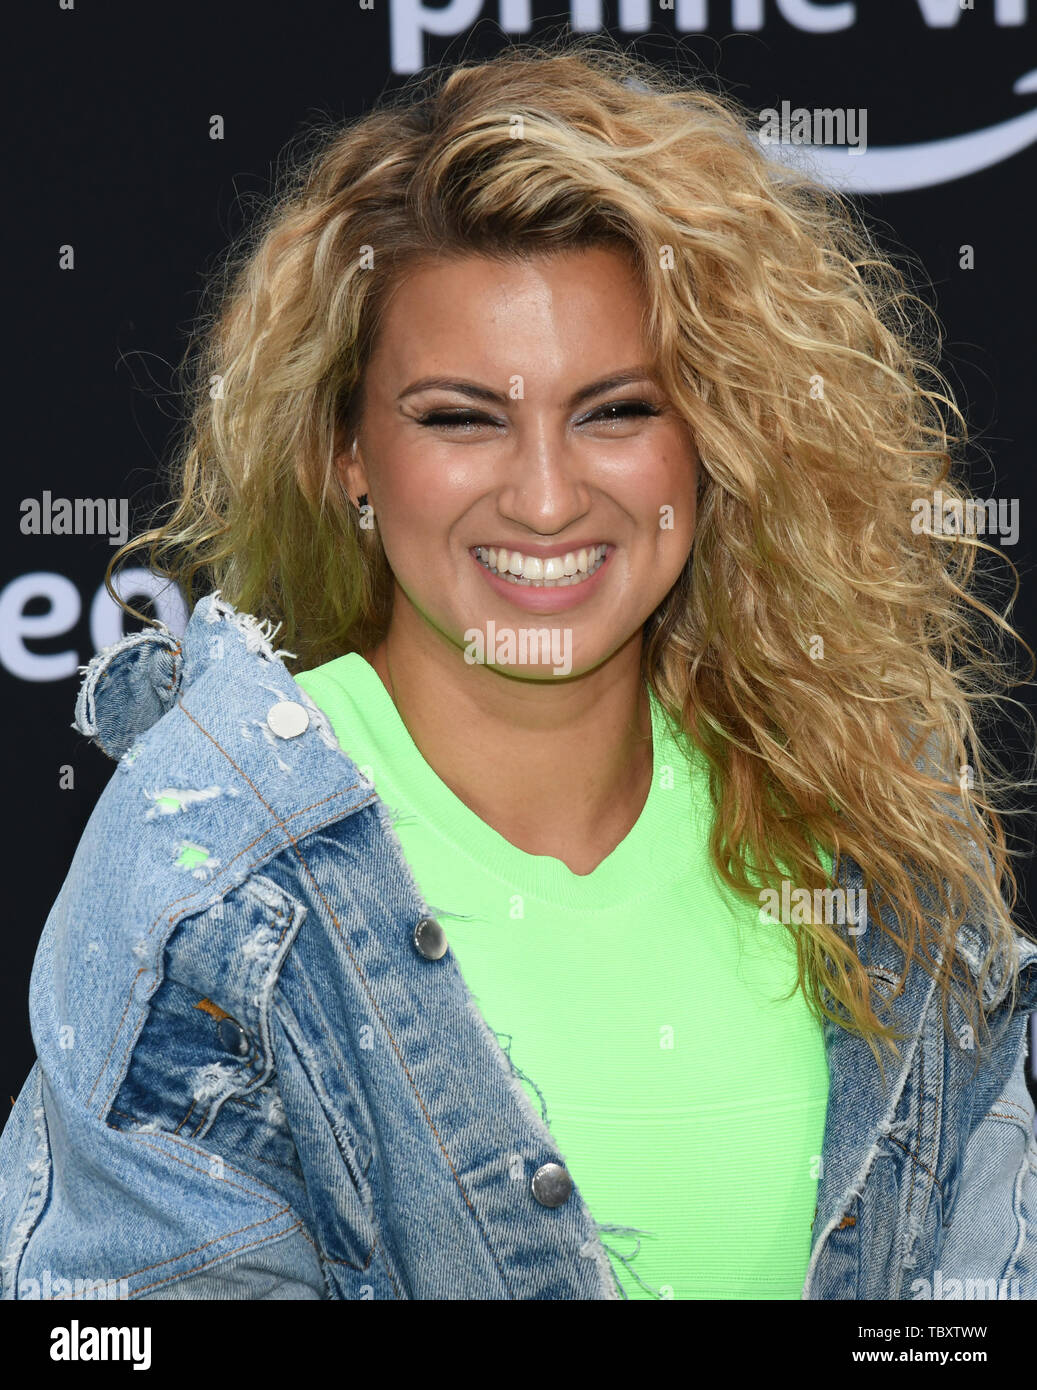 June 3, 2019 - Westwood, California, USA - 02, June 2019 - Westwood Village, California. Tori Kelly attends Premiere Of Amazon Prime Video's 'Chasing Happiness' at the Regency Village Bruin Theatre. (Credit Image: © Billy Bennight/ZUMA Wire) Stock Photo